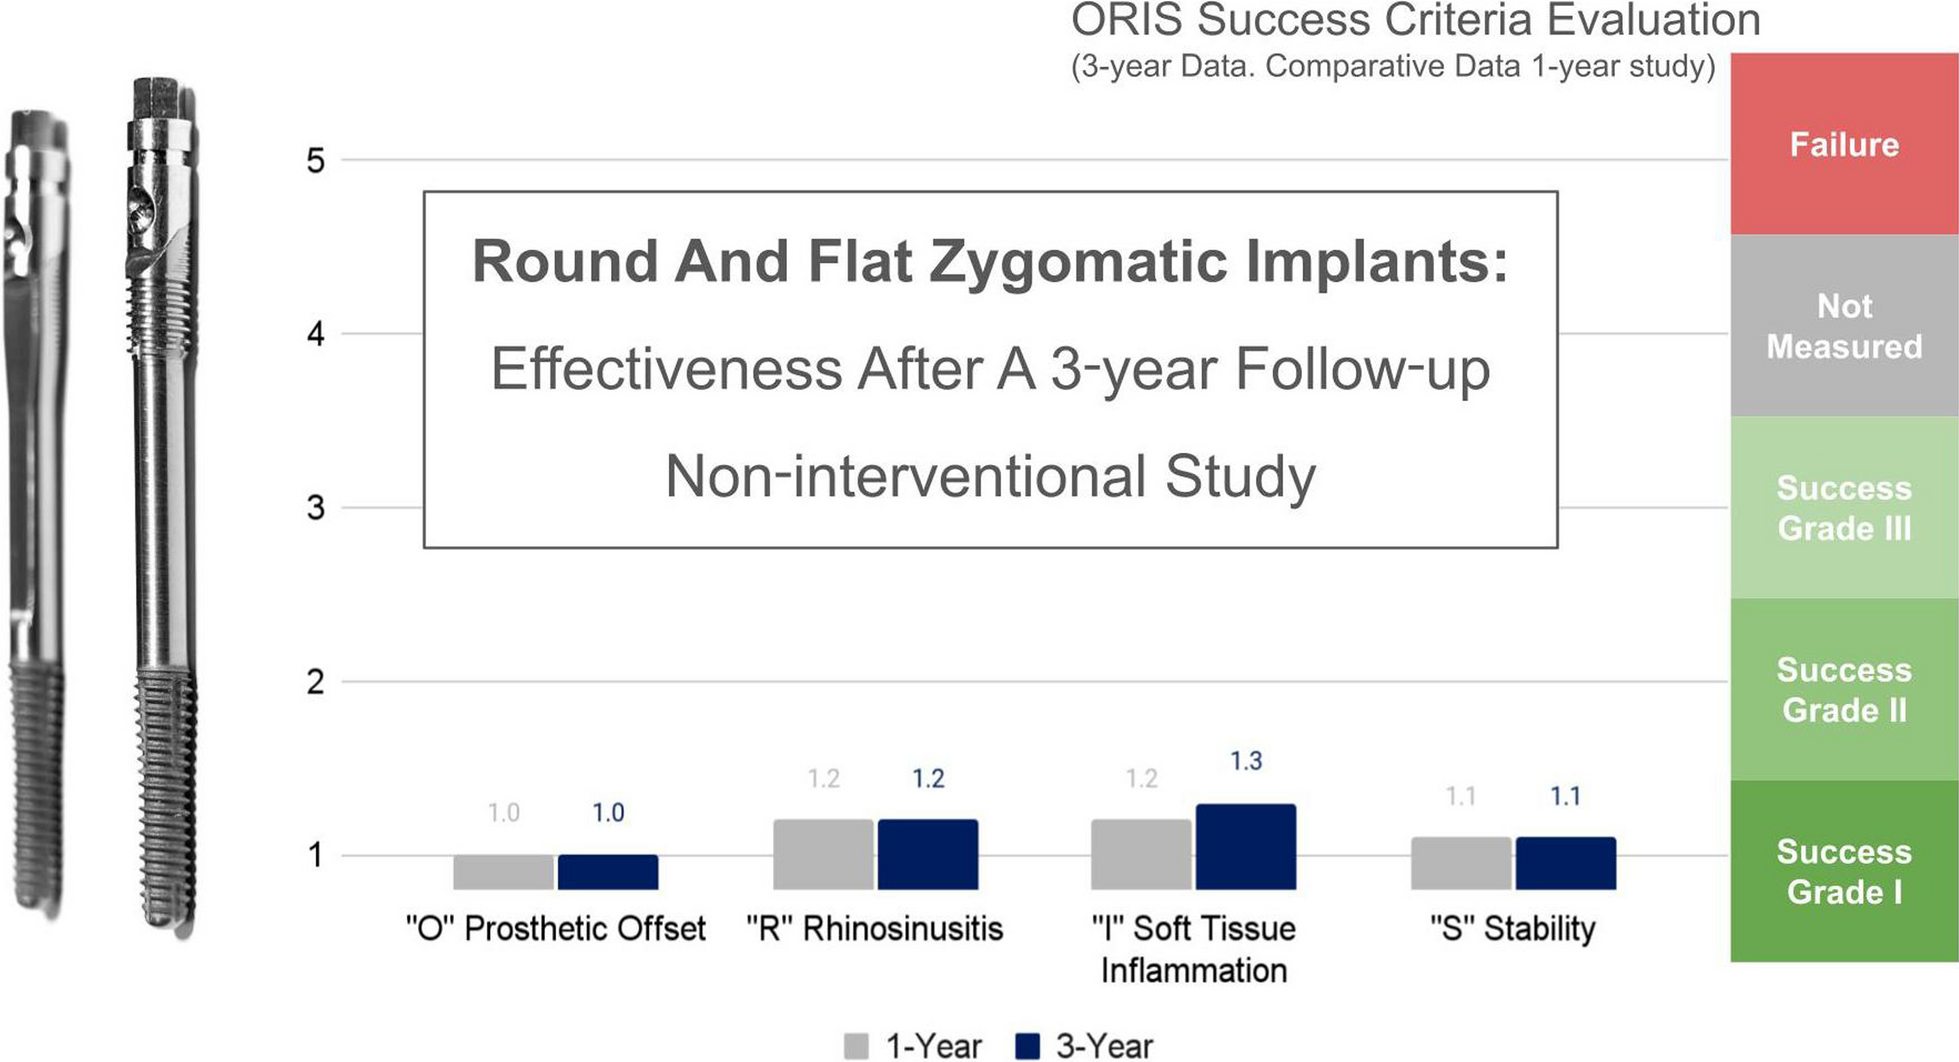 Round and flat zygomatic implants: effectiveness after a 3‑year follow‑up non‑interventional study